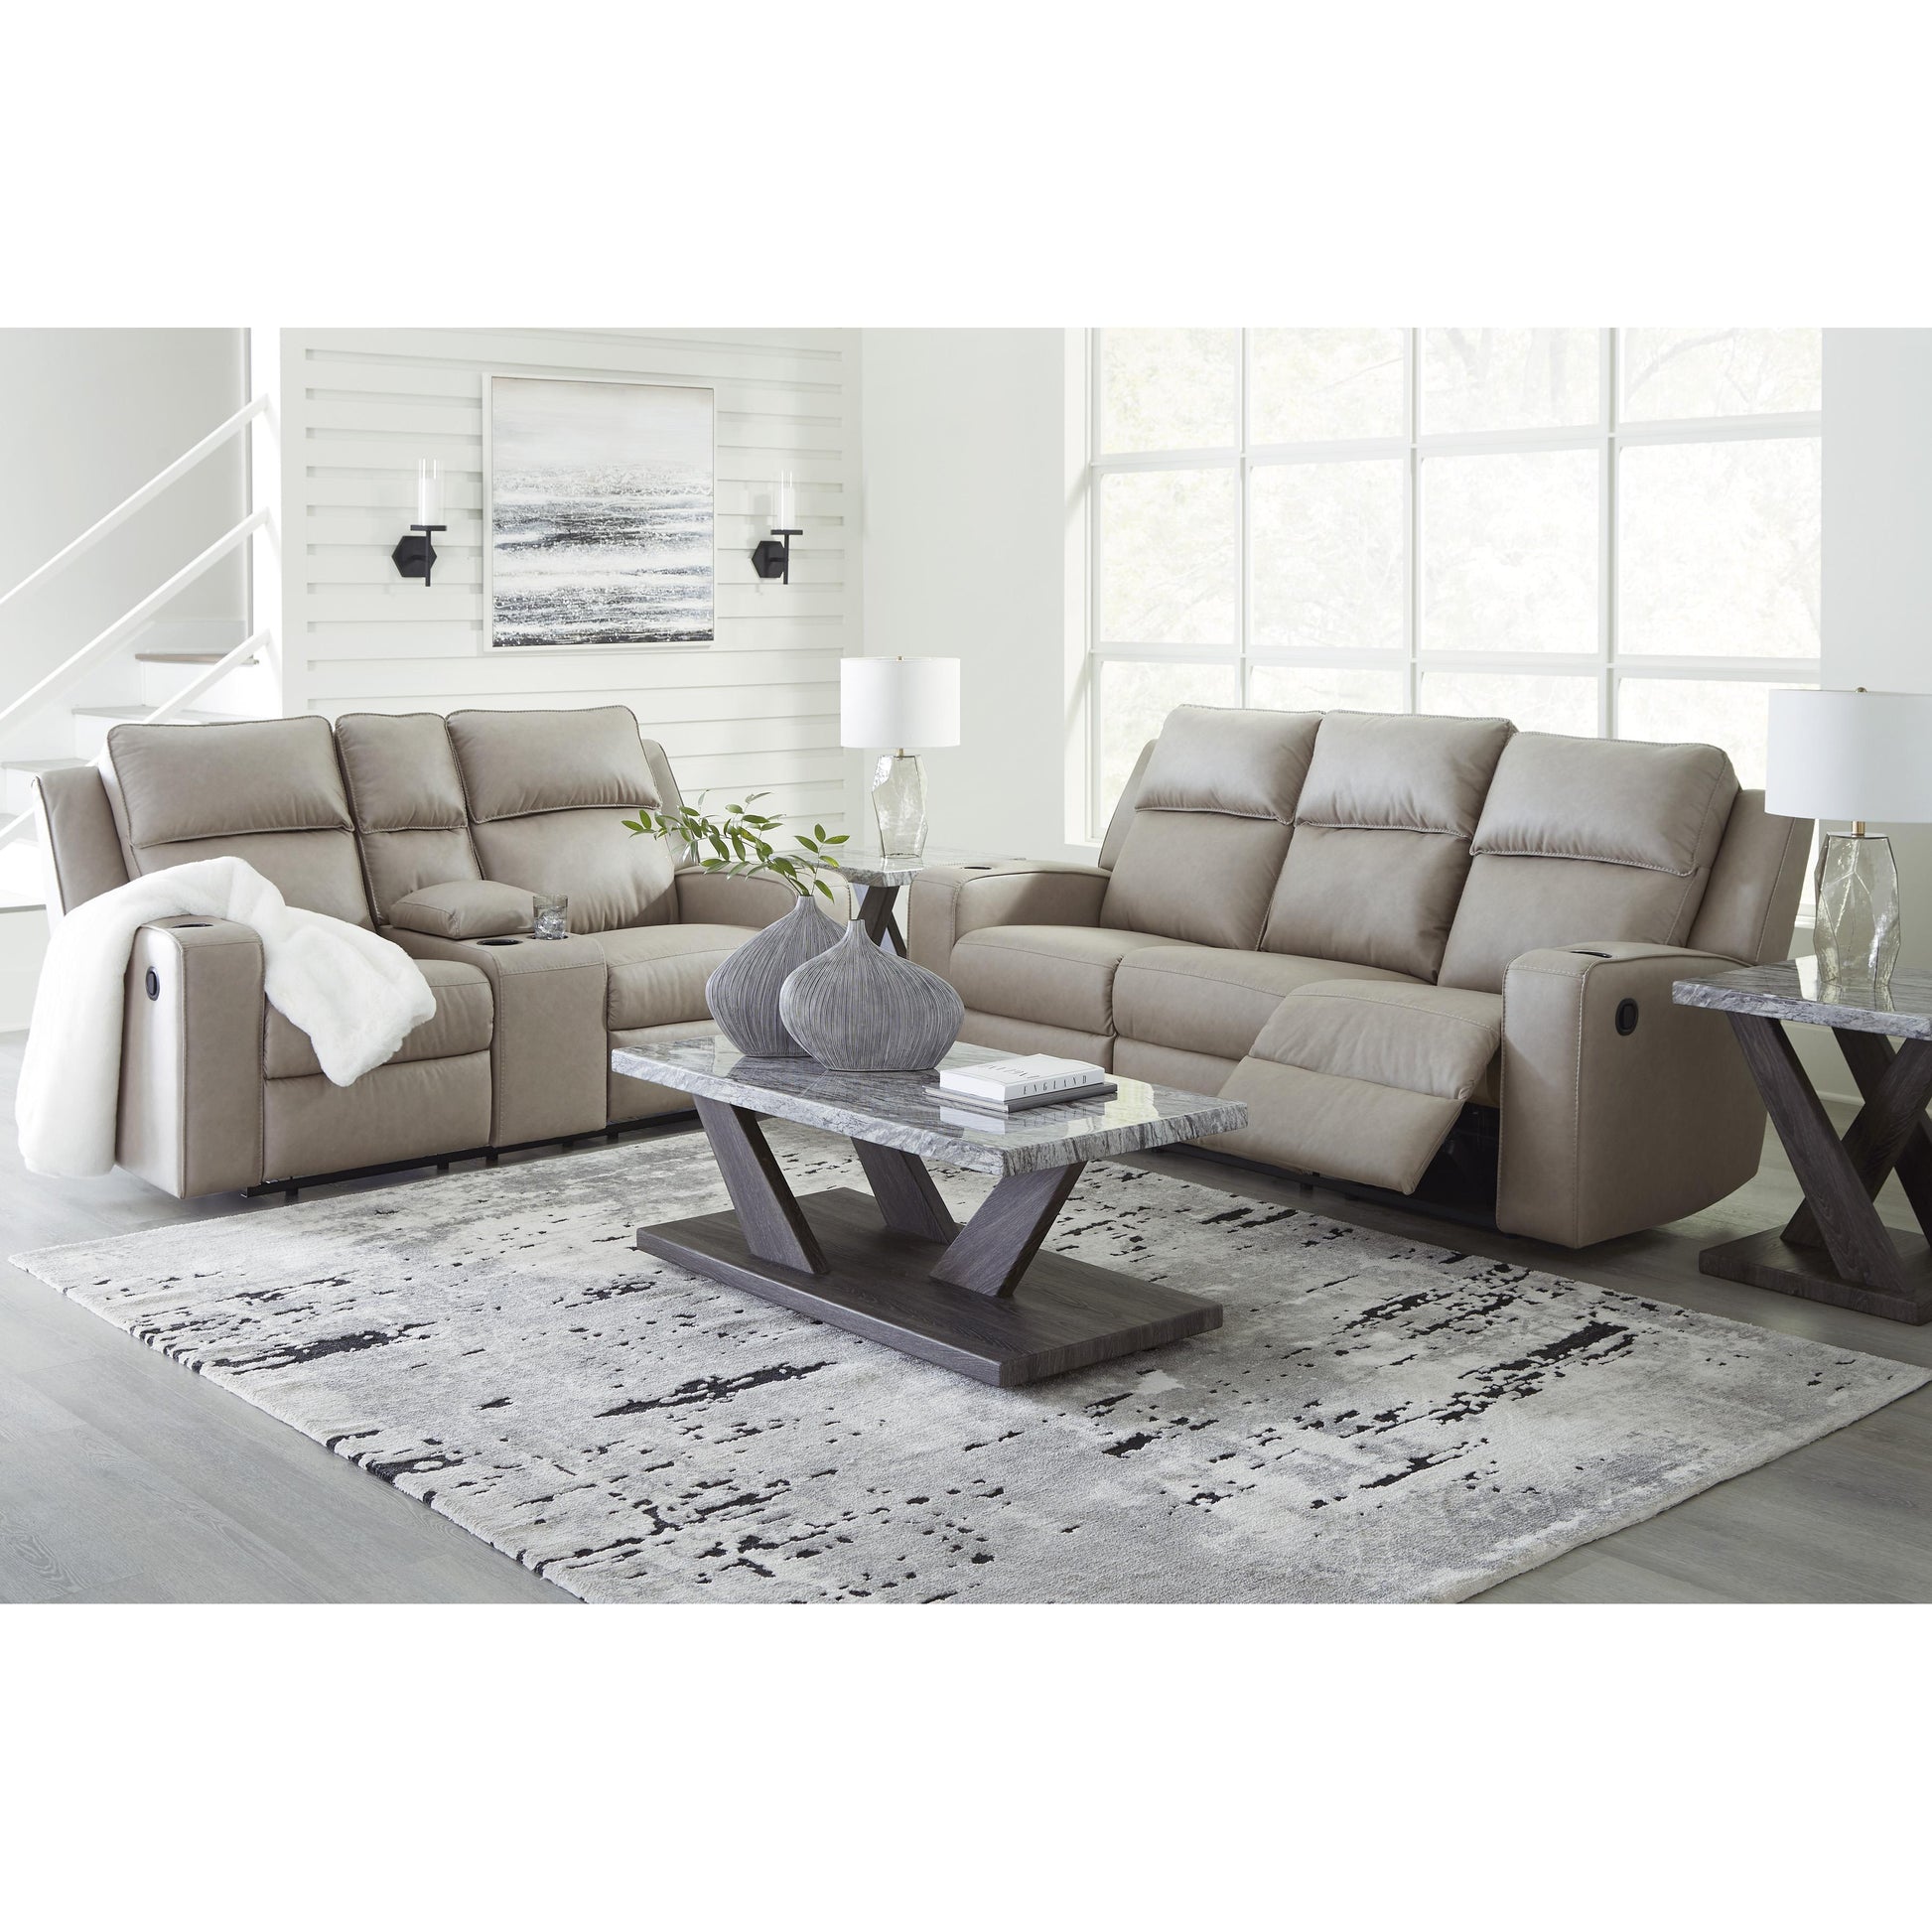 Signature Design by Ashley Lavenhorne Reclining Leather Look Loveseat 6330794 IMAGE 10